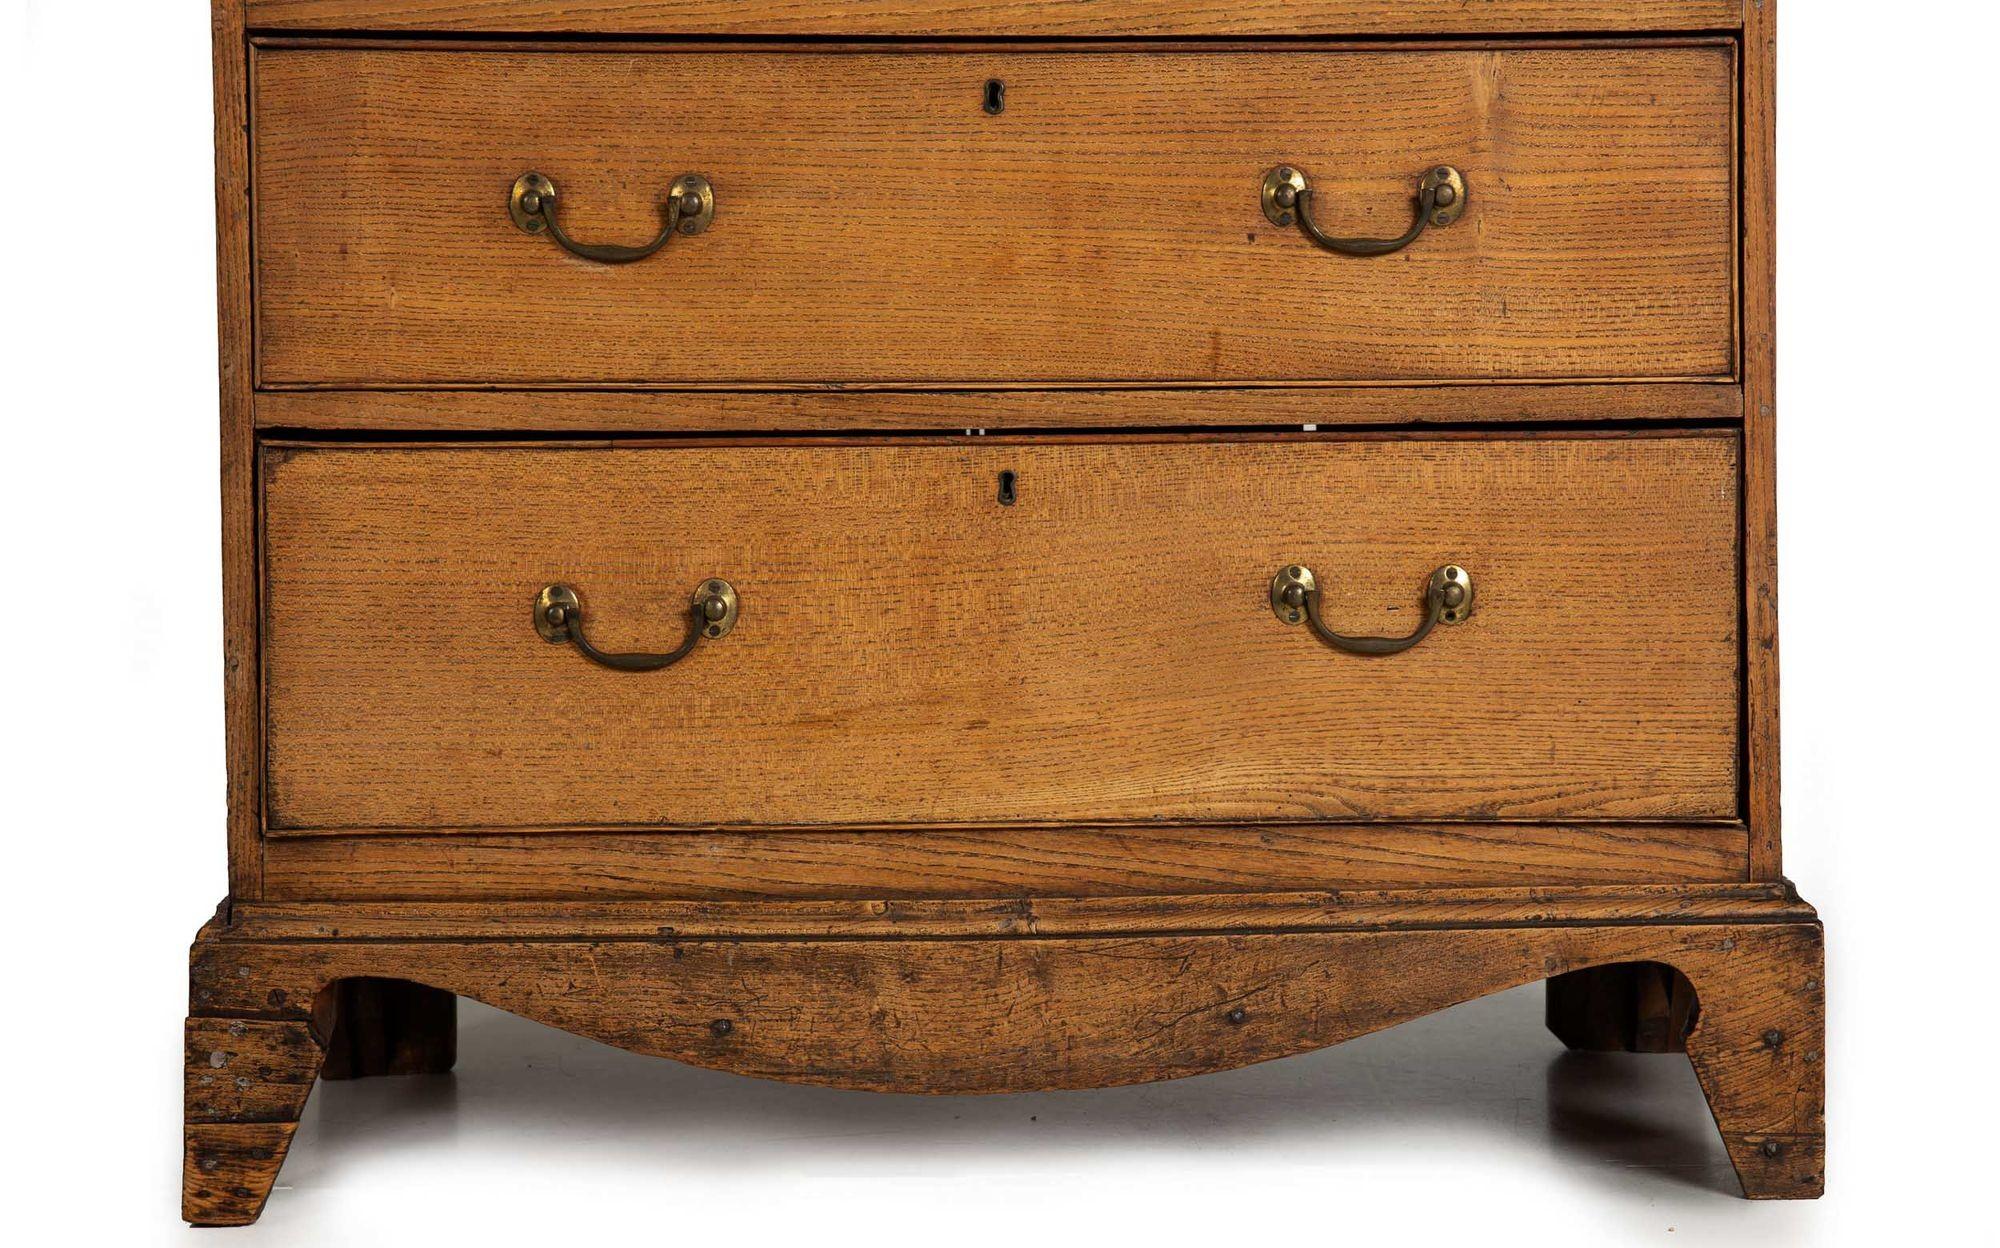 English Antique Patinated Worn Elm Chest of Drawers, Early 19th Century For Sale 3